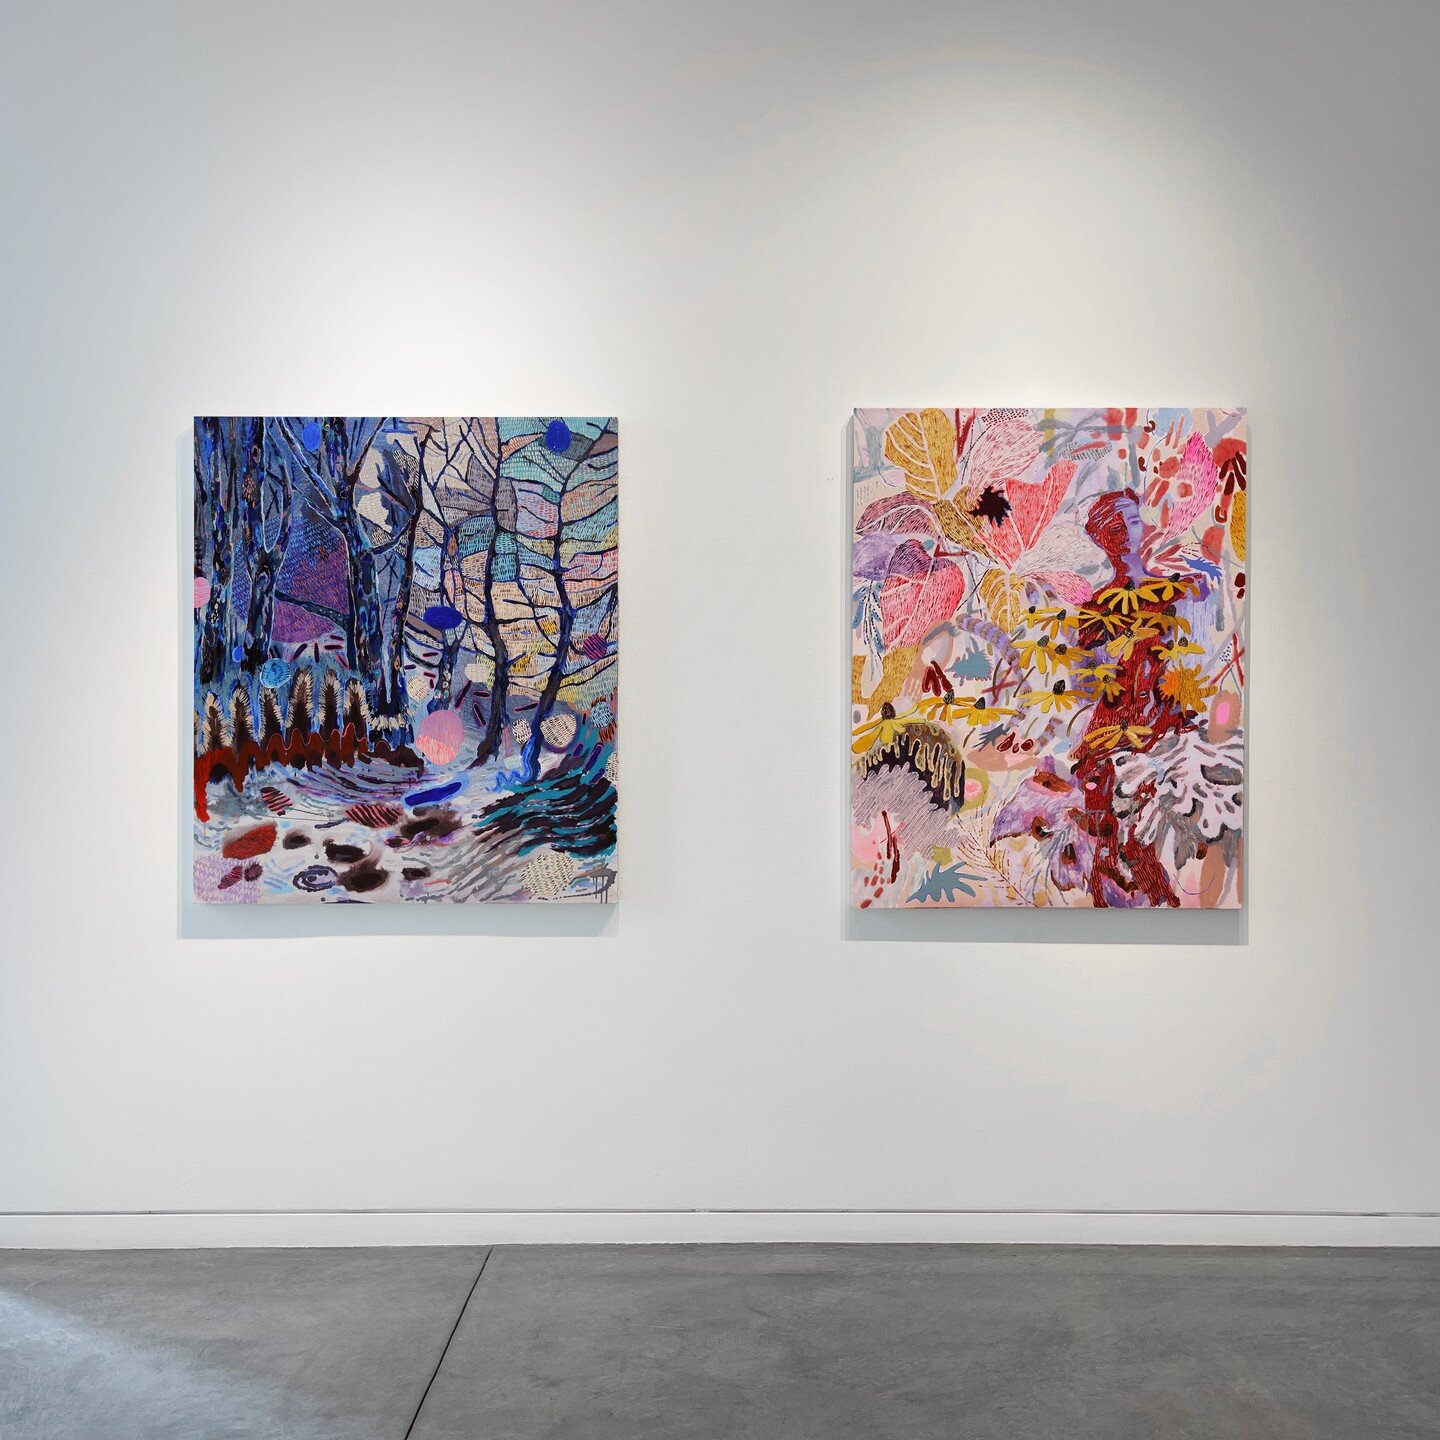 Sharing with you a few more installation views of &quot;Throw Open the Windows&quot; at Maybaum Gallery, San Francisco. Open until March 31.

#soloexhibition&nbsp;#impasto&nbsp;#oilpaint&nbsp;#oilpainting&nbsp;#roofoftheworld&nbsp;#markmaking&nbsp;#p